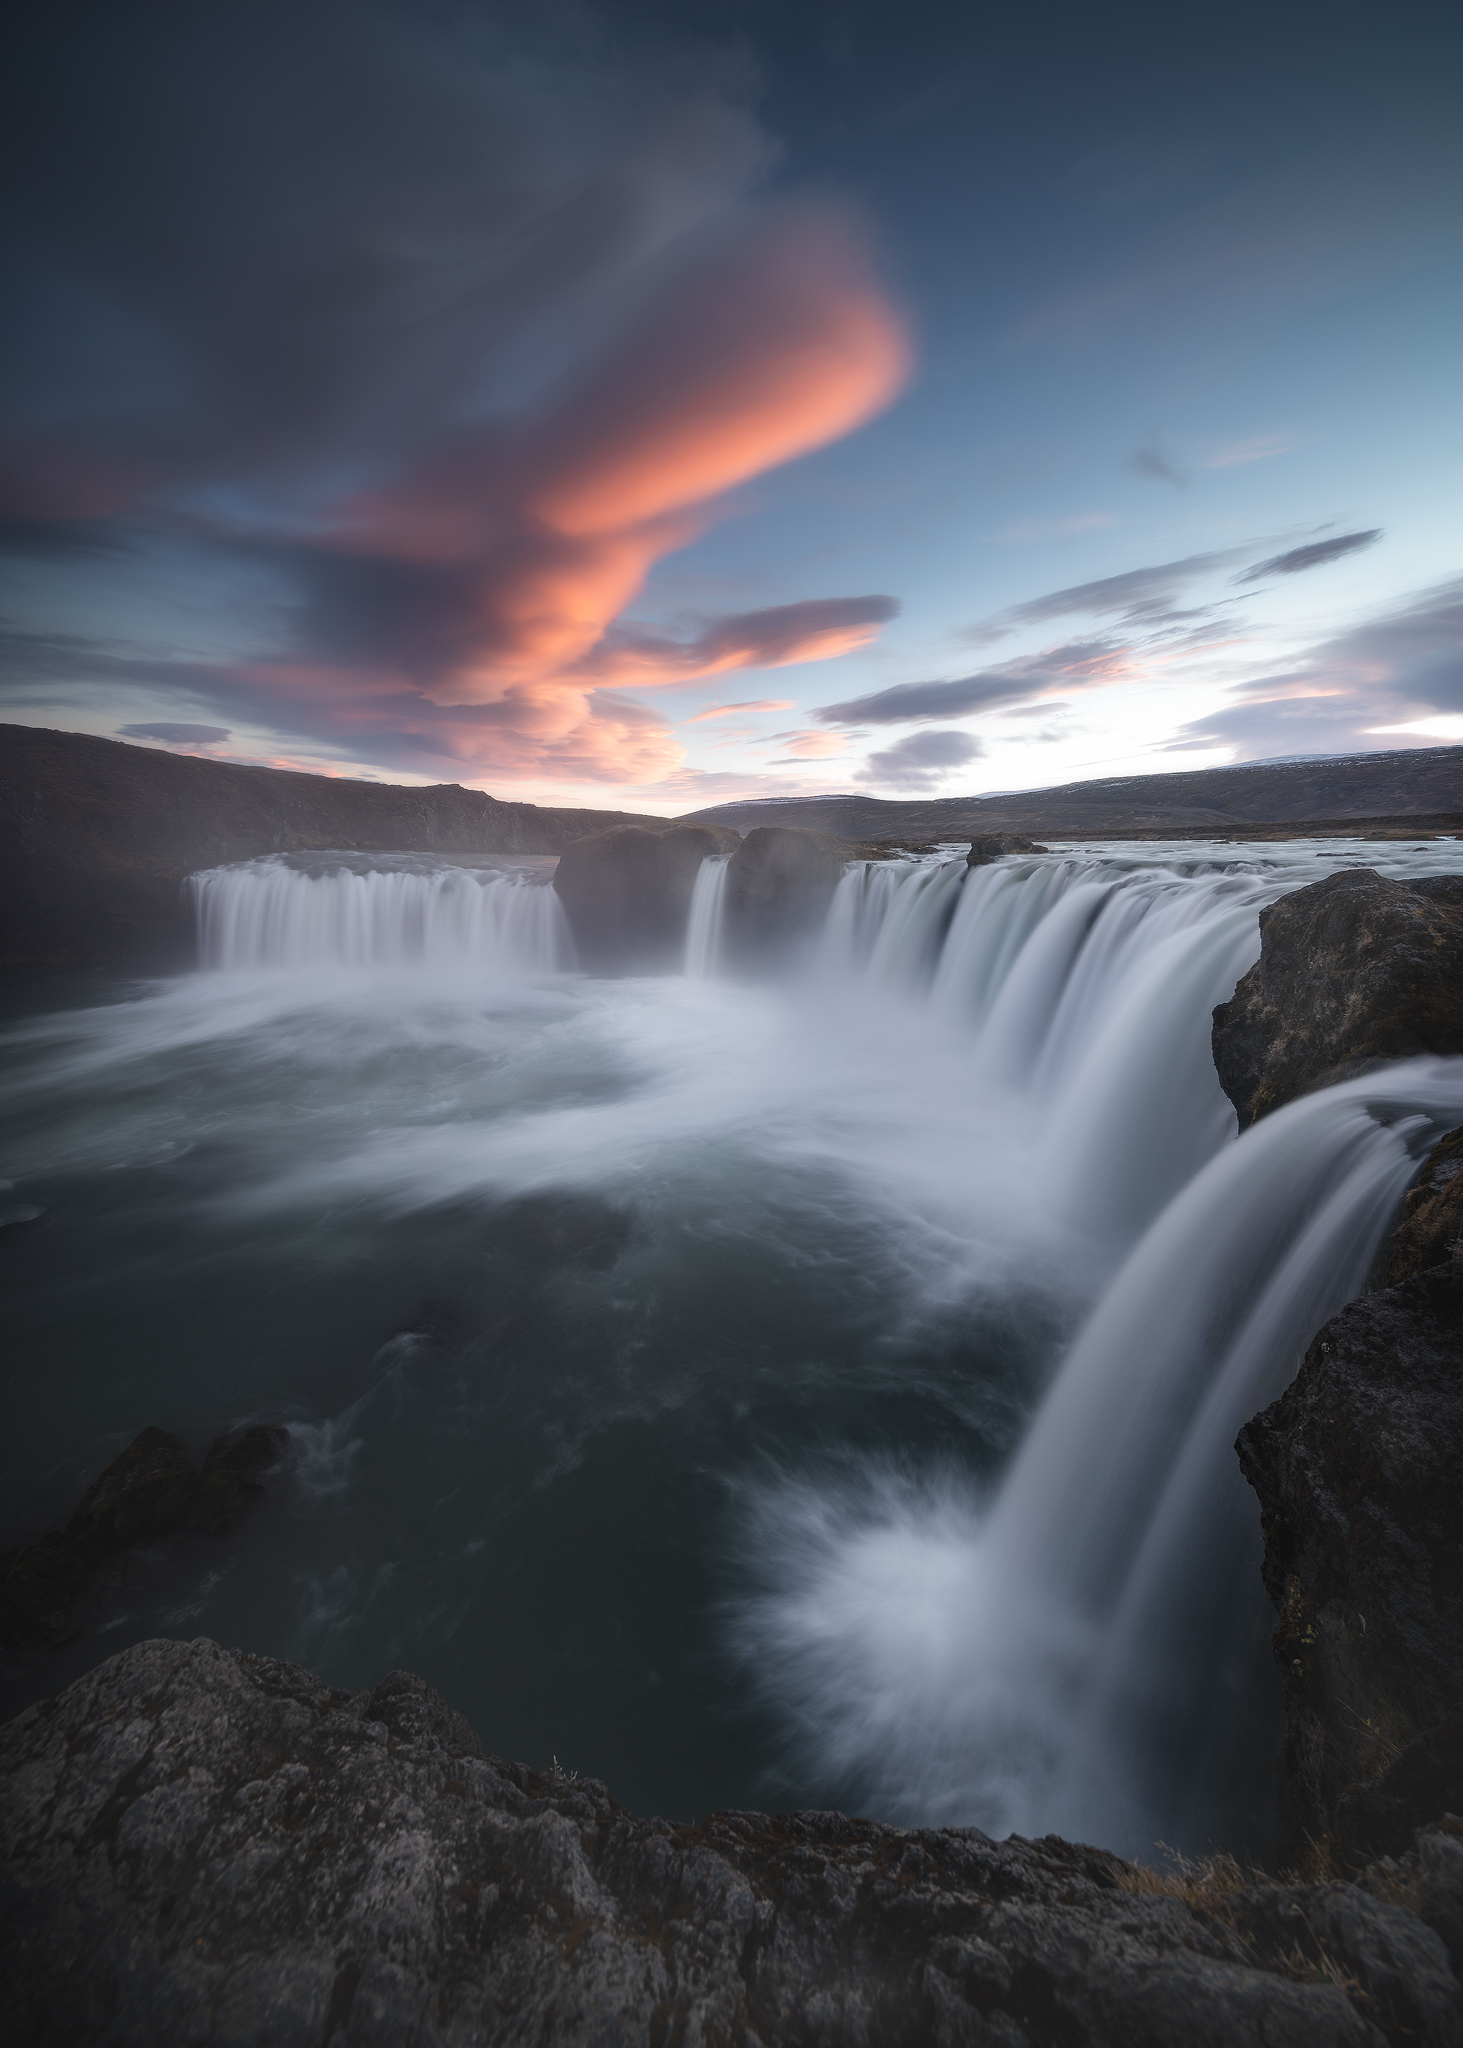 photographing the world 1: landscape photography and post-processing